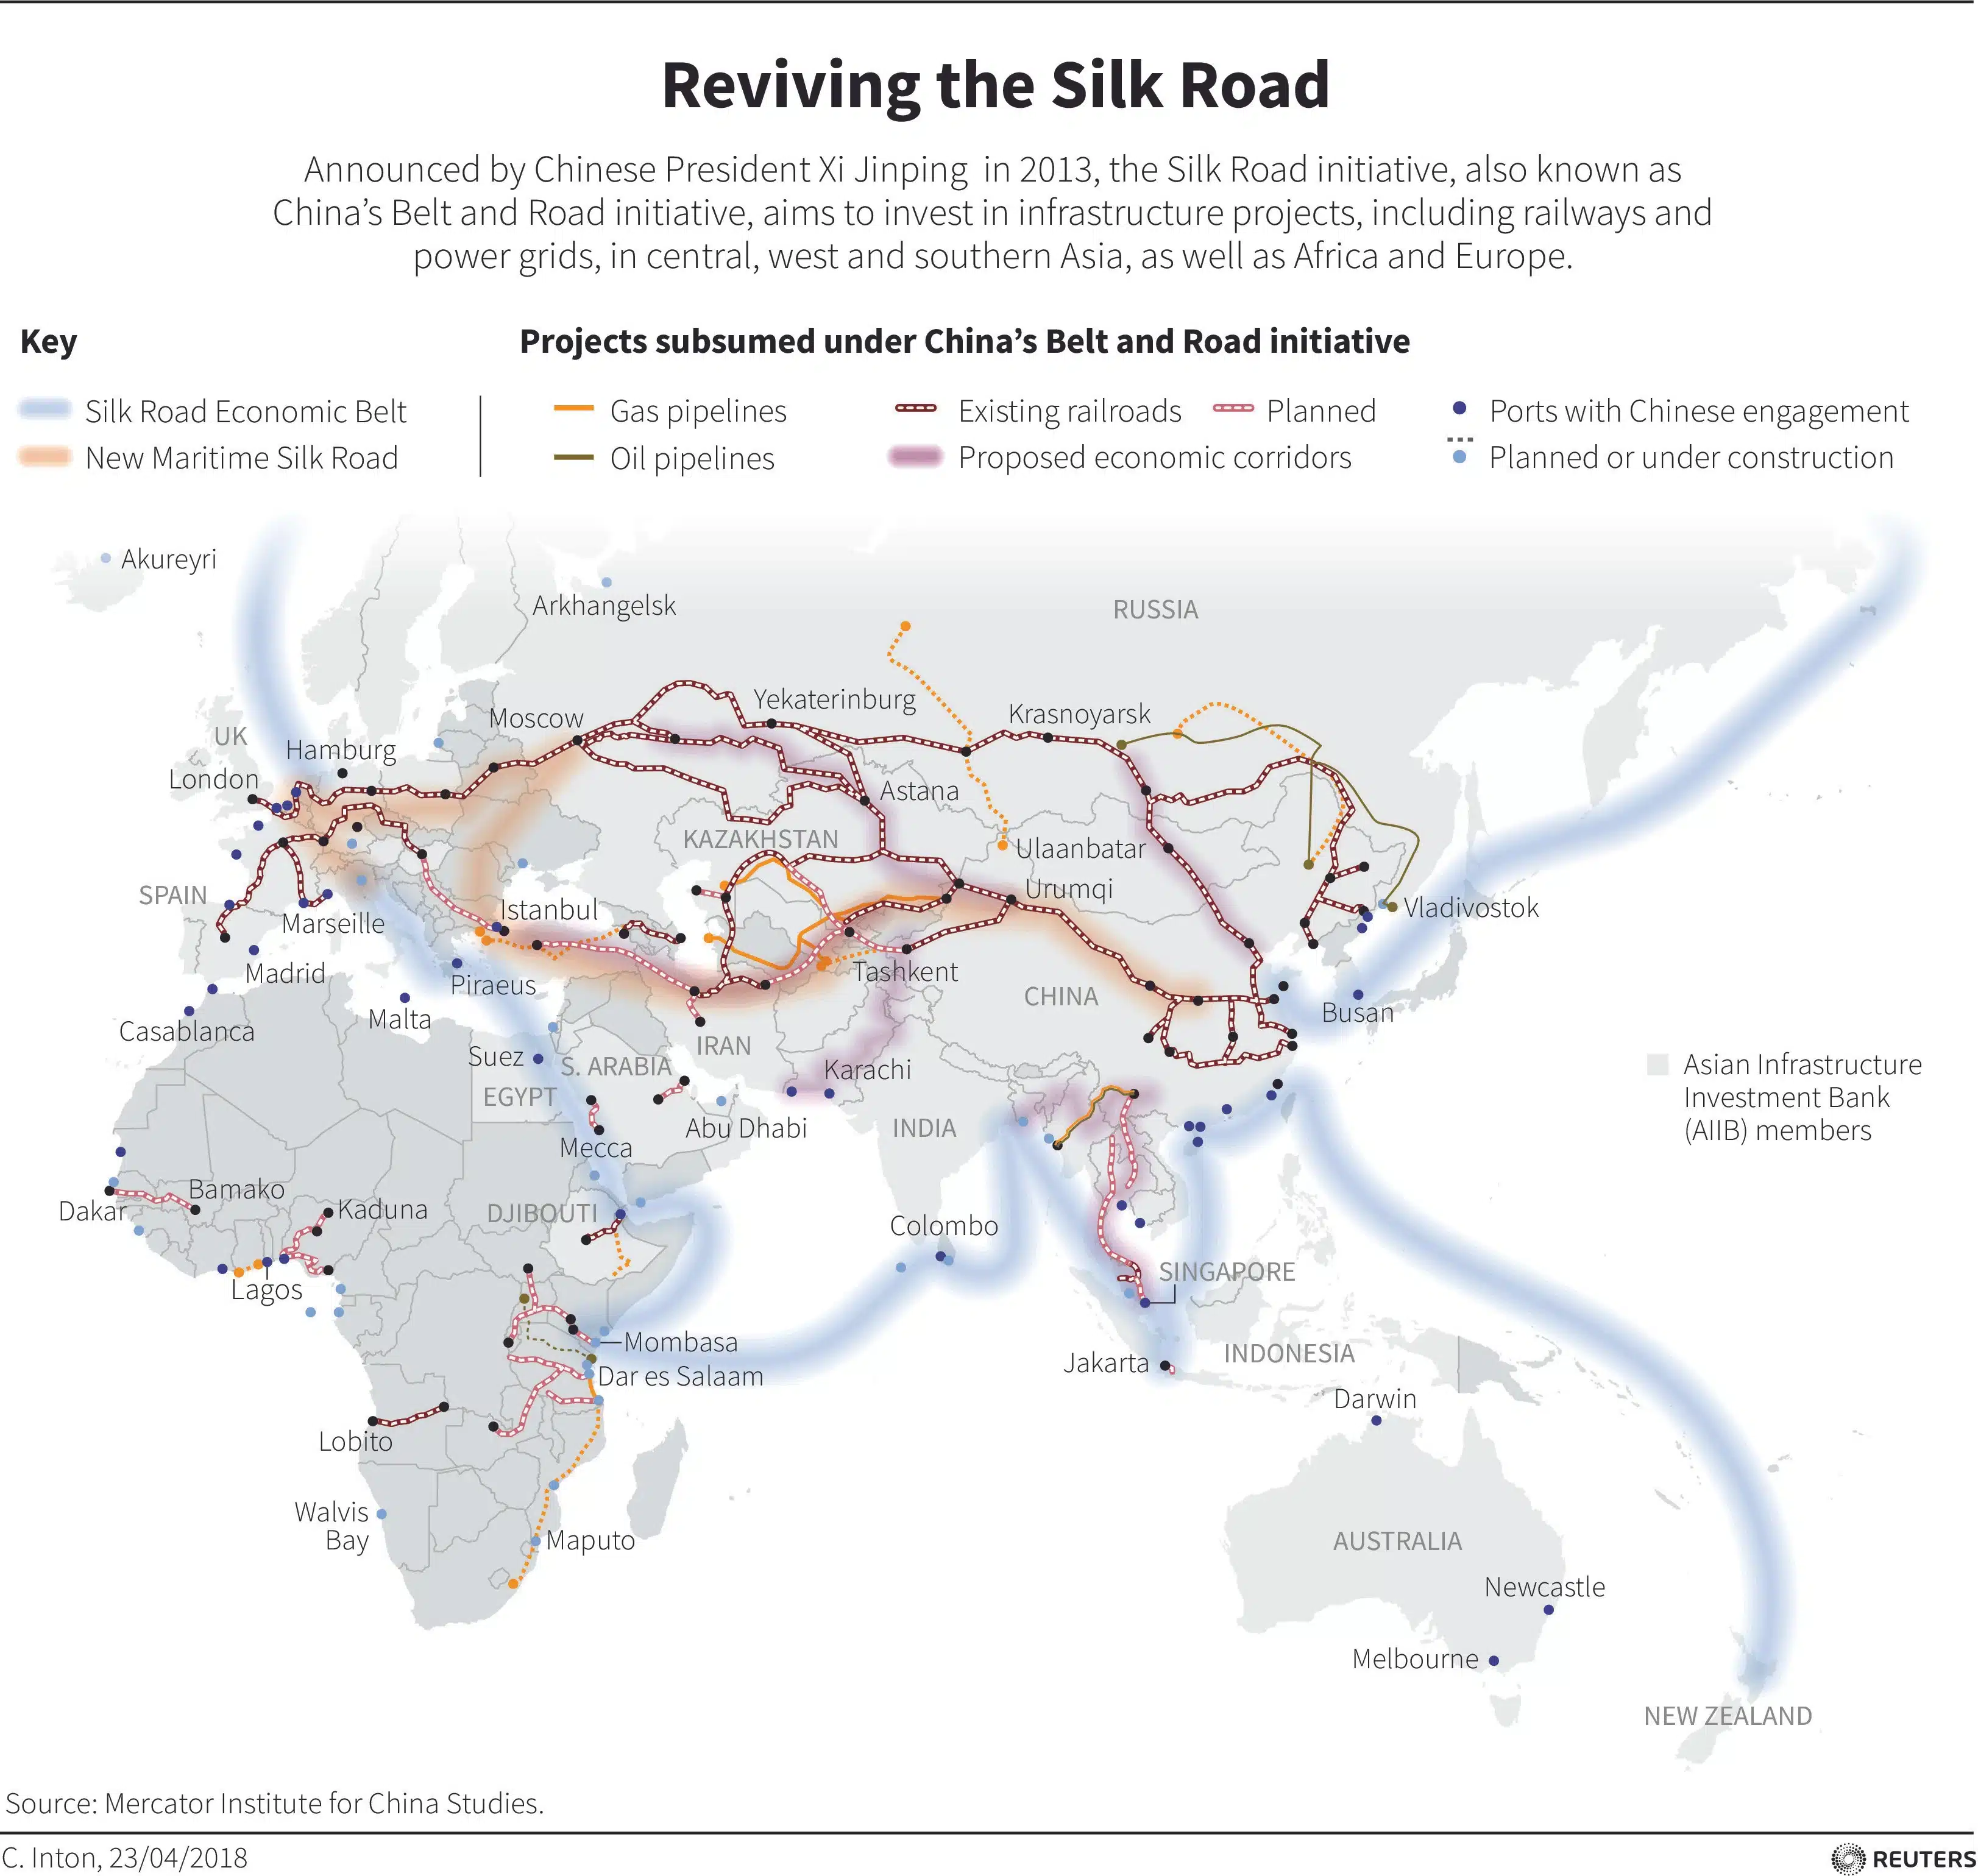 The "Digital Silk Road" could drive a green transformation in infrastructure and economic models across emerging markets [Image via Reuters].